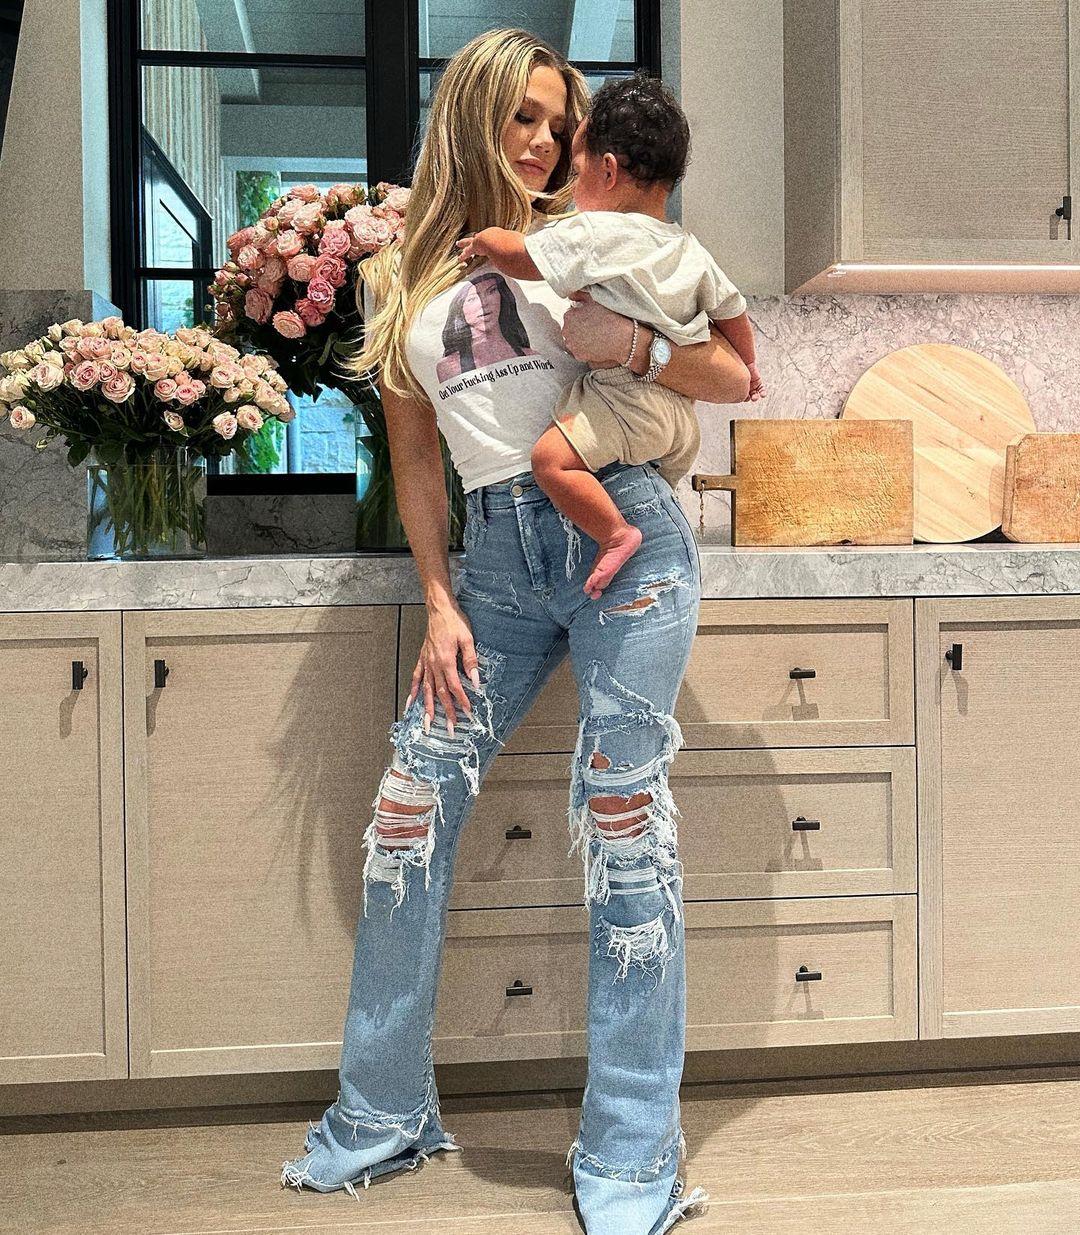 Khloe Kardashian Admitted To Not Feeling A Connection With Her Second Child